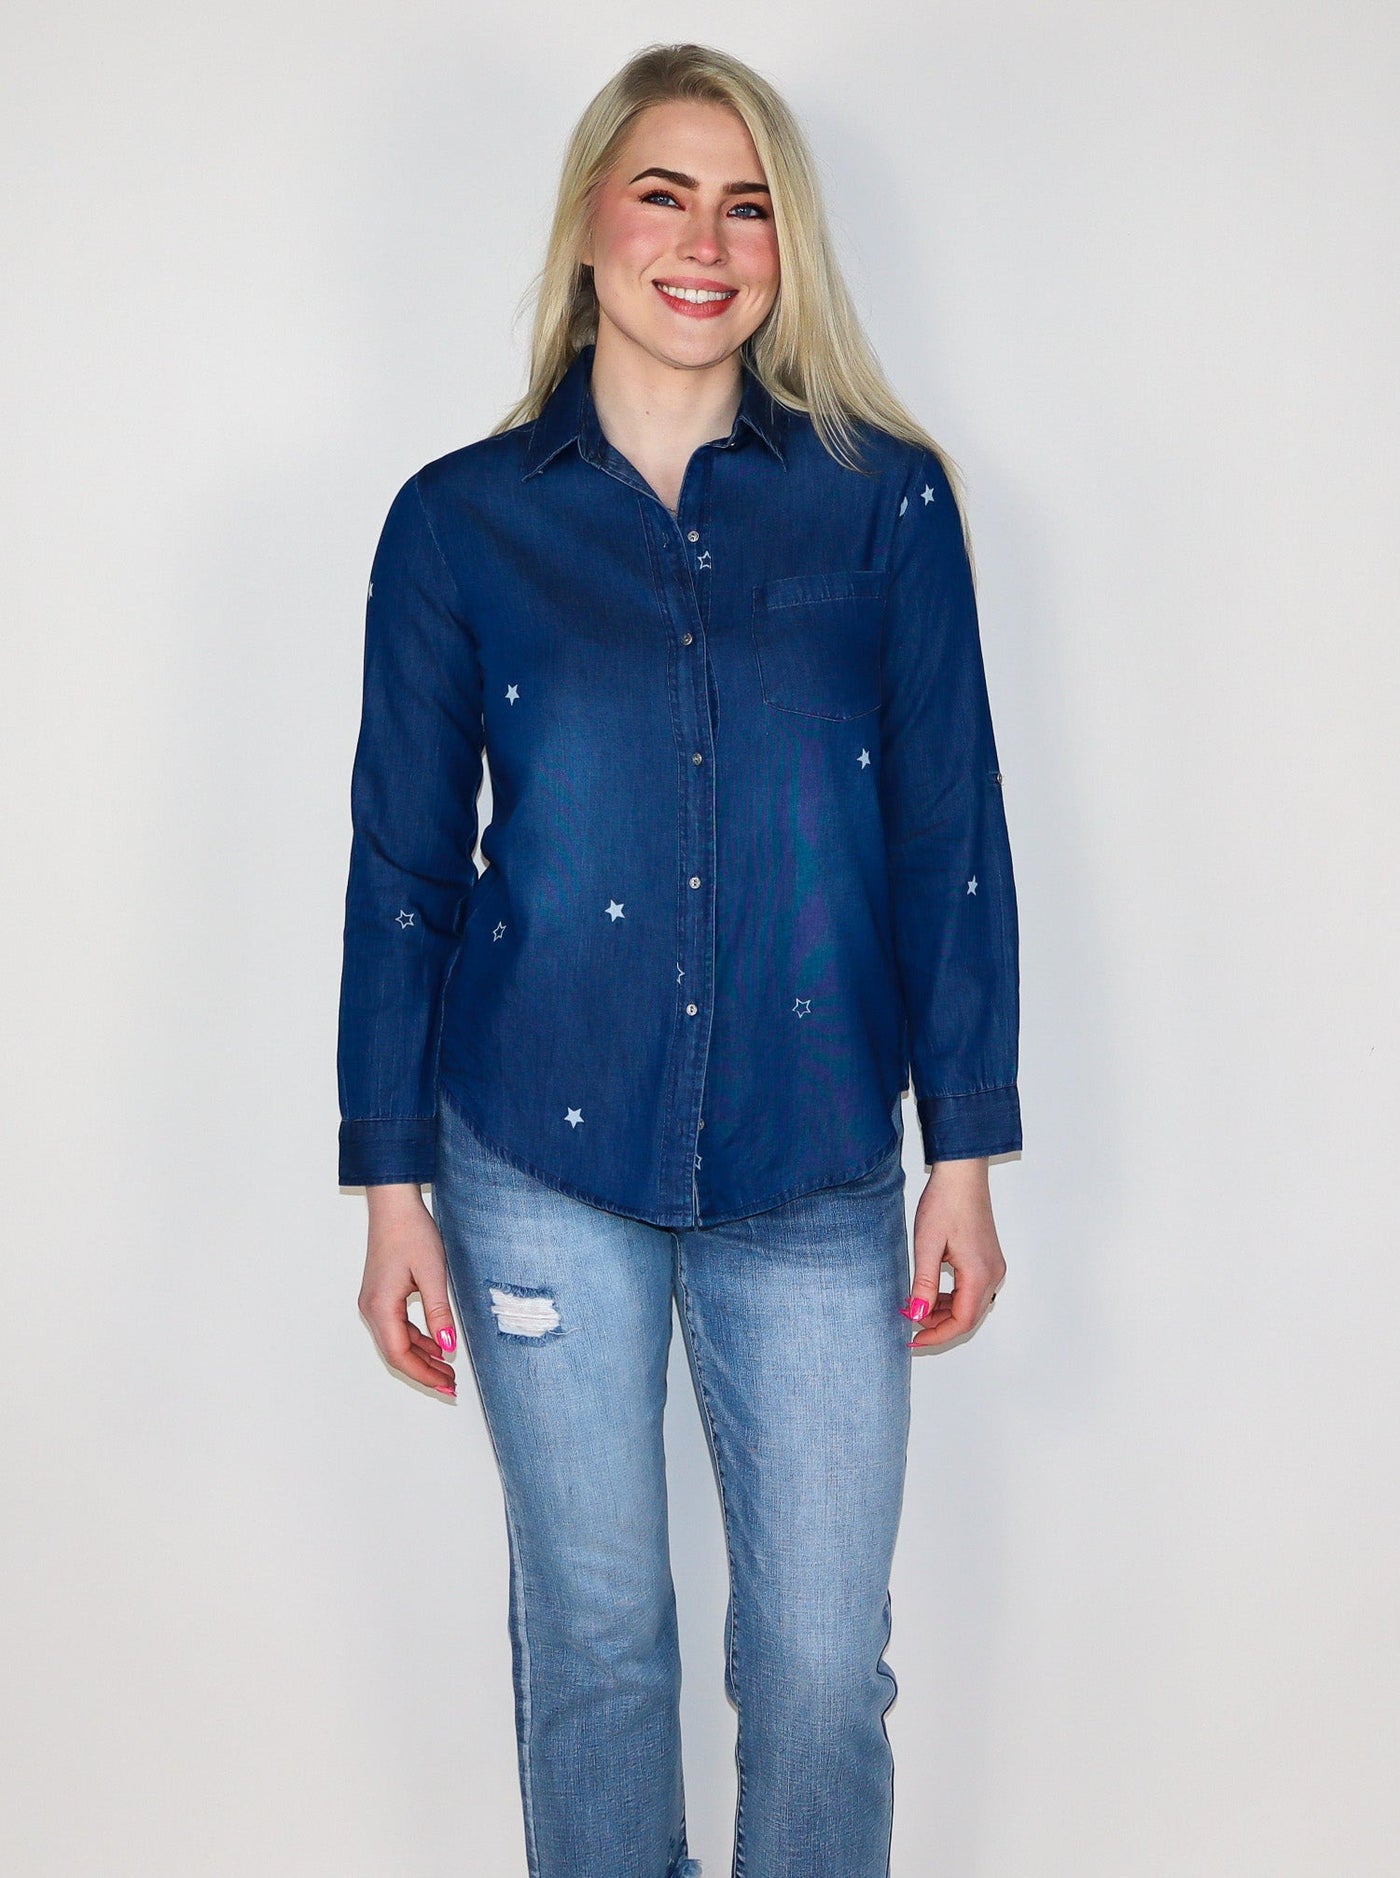 Model is wearing a dark blue wash denim button up with white stars all over. Top is worn with blue jeans. 